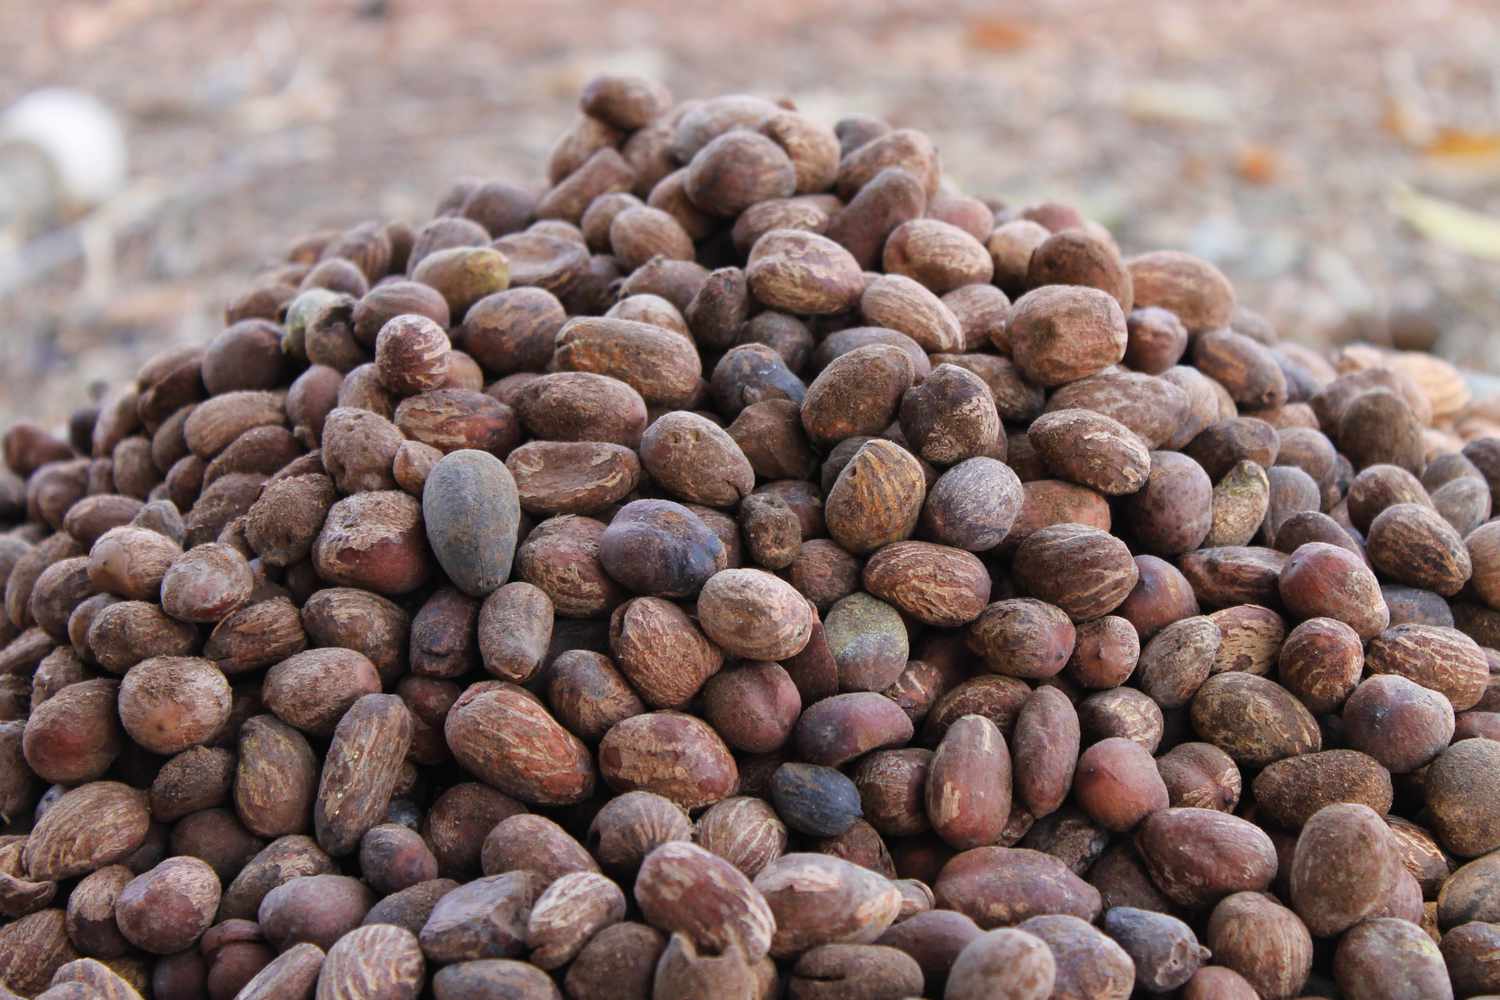 The seeds of shea butter